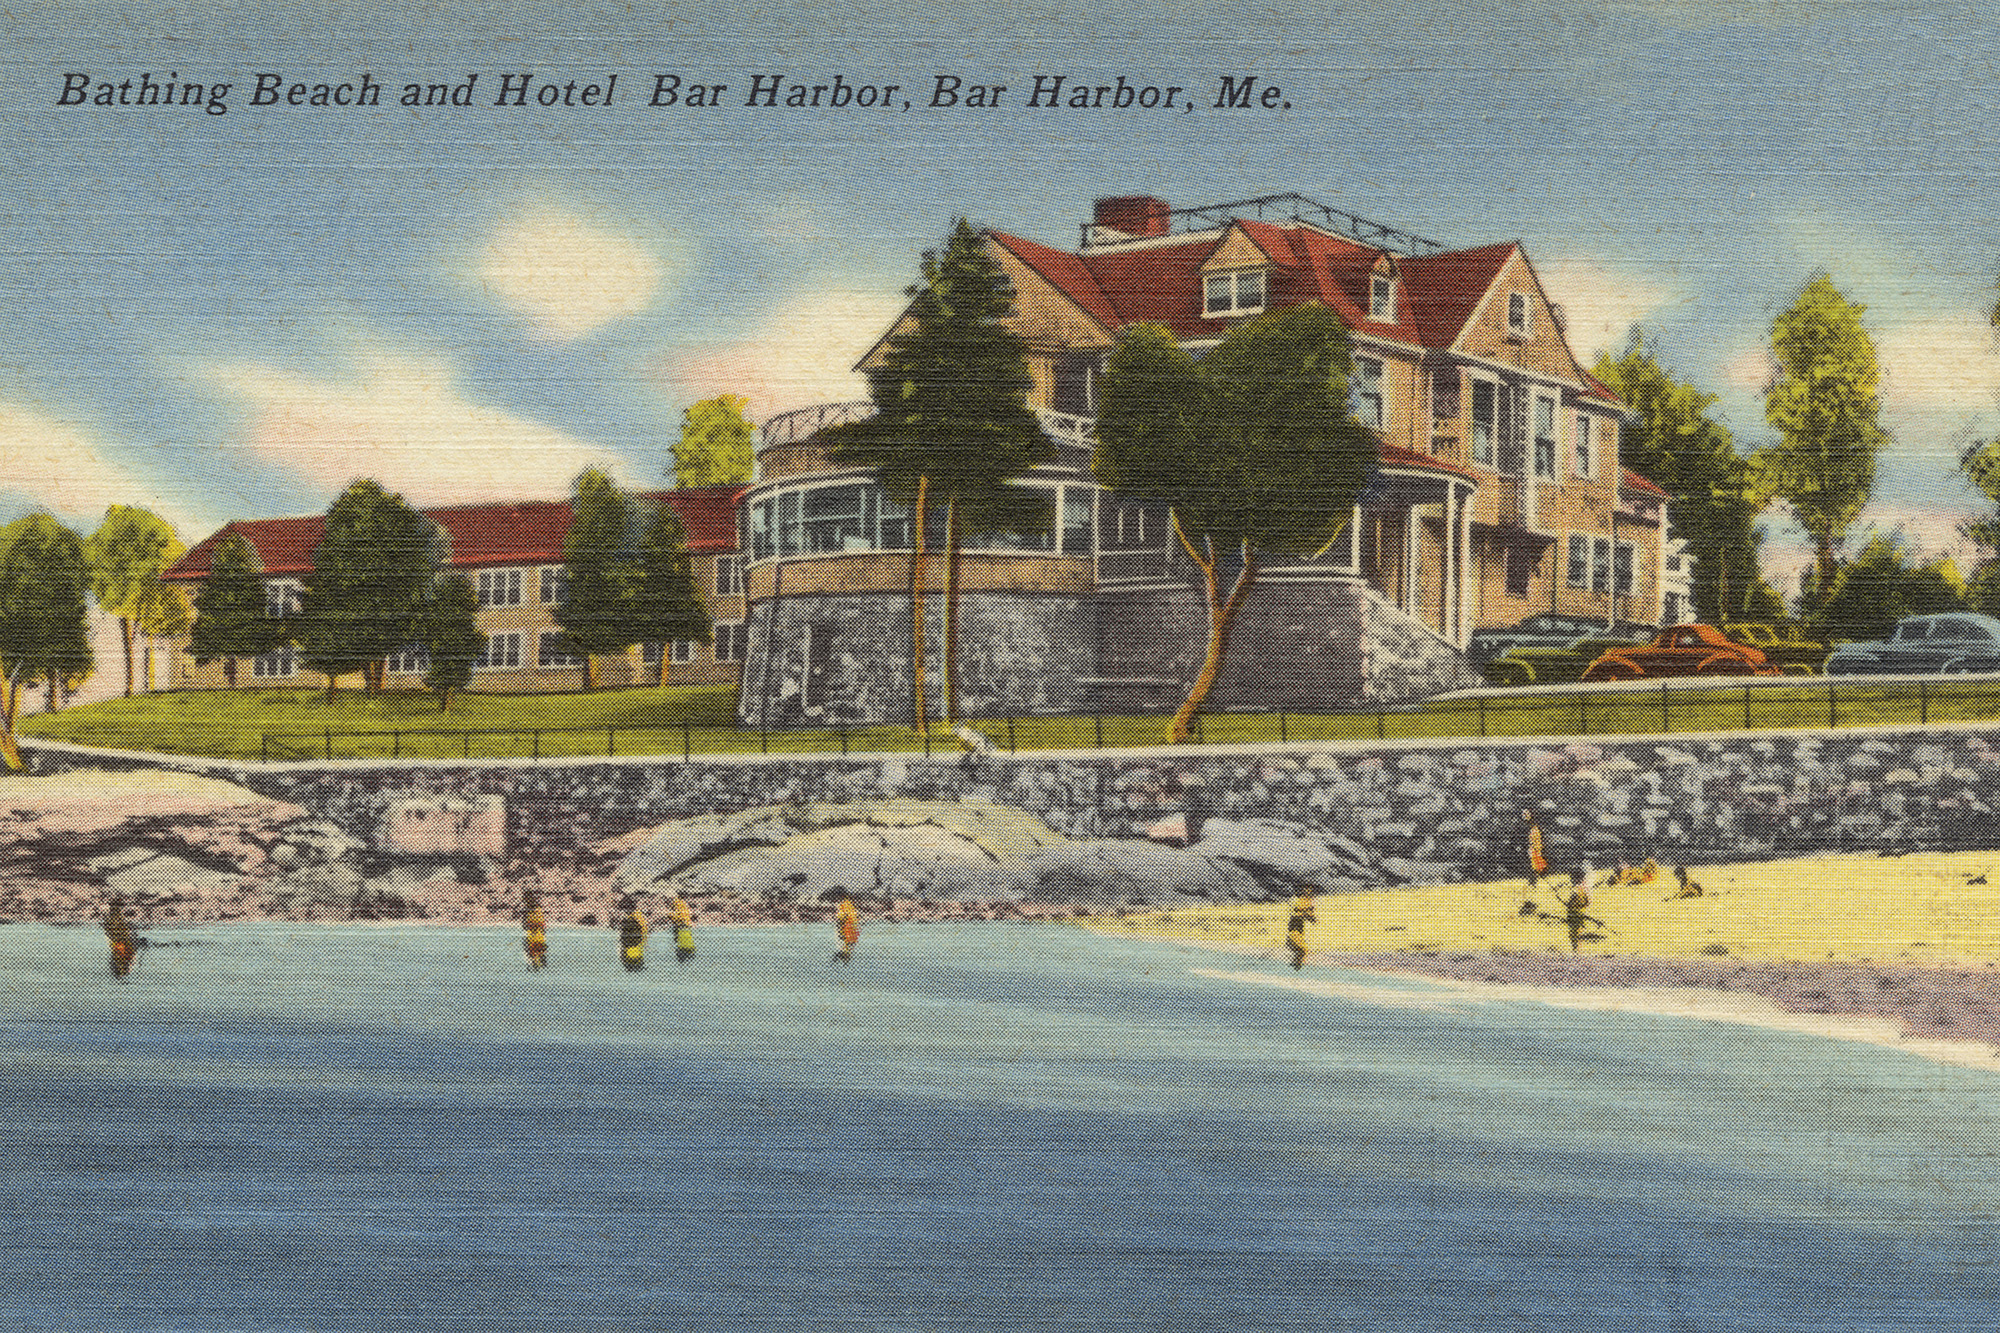 historic image of the Hotel Bar Harbor. Courtesy of Boston Public Library, Print Department